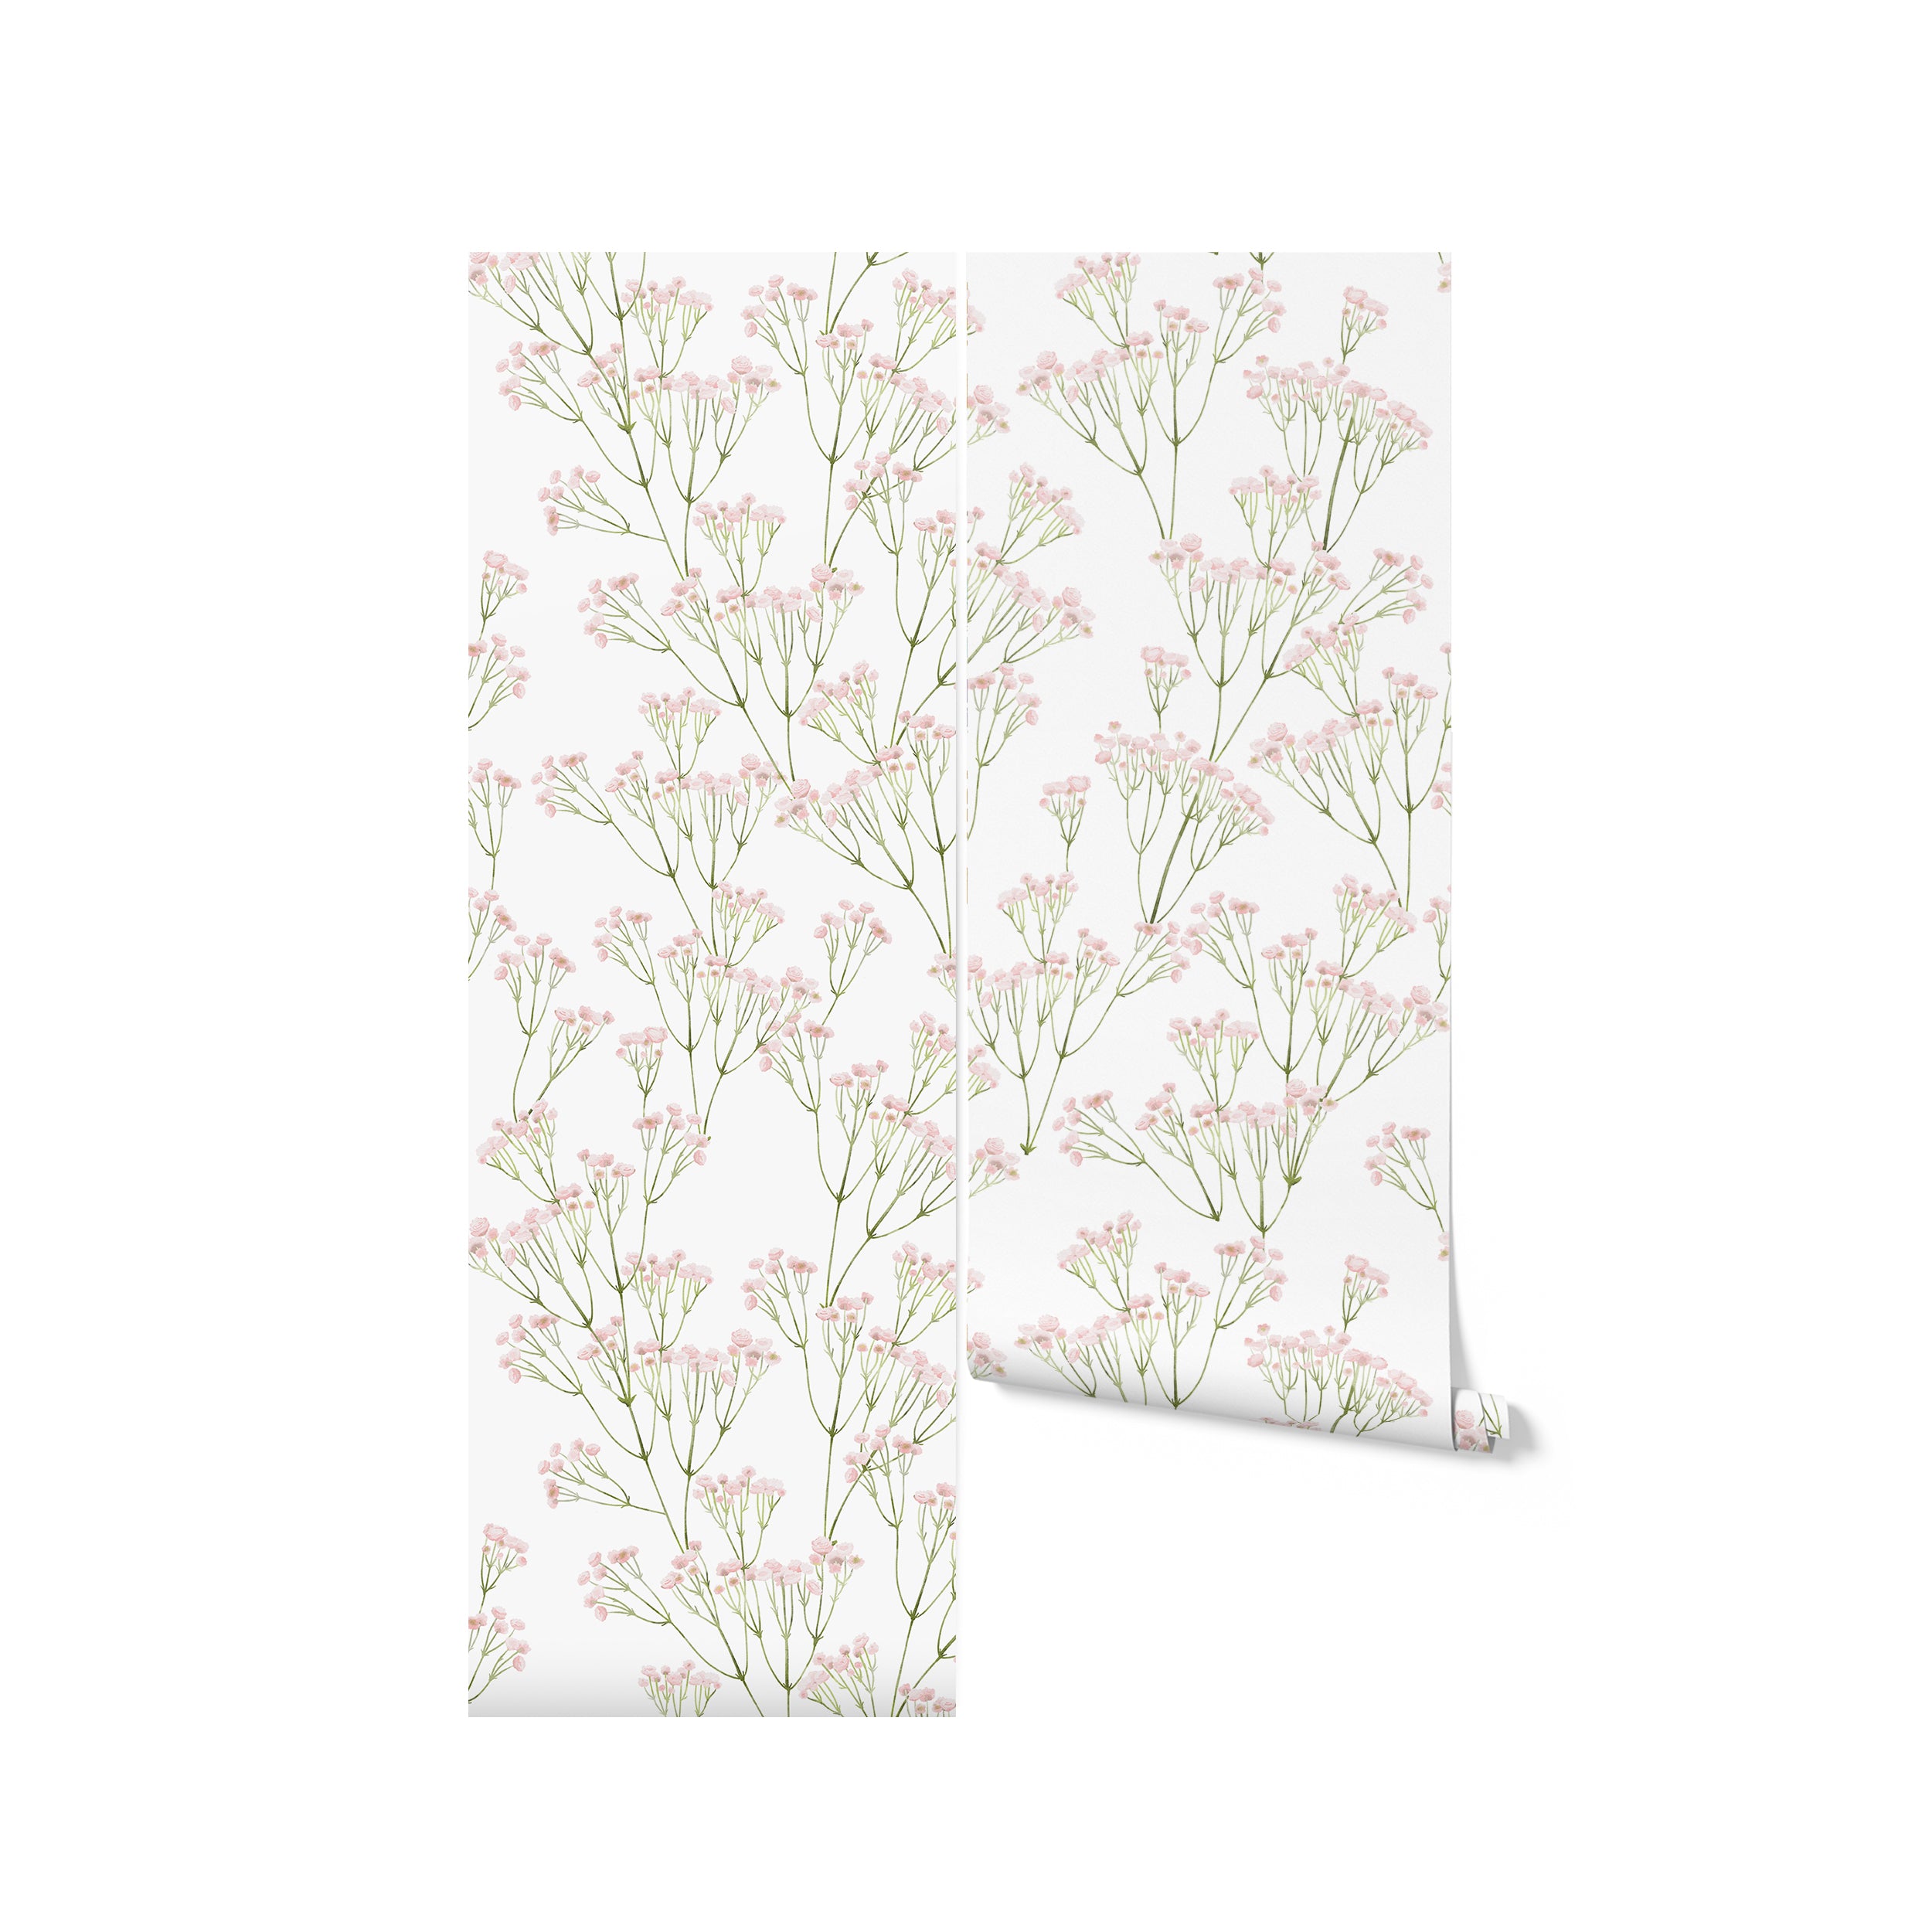 A single roll of 'Le Marchand de Fleurs Wallpaper', partially unrolled to reveal the delicate pattern of pink flowers on green stems, set against a clean white background. This wallpaper brings a light, botanical feel to any interior, inviting the tranquility of a flower meadow into the home.